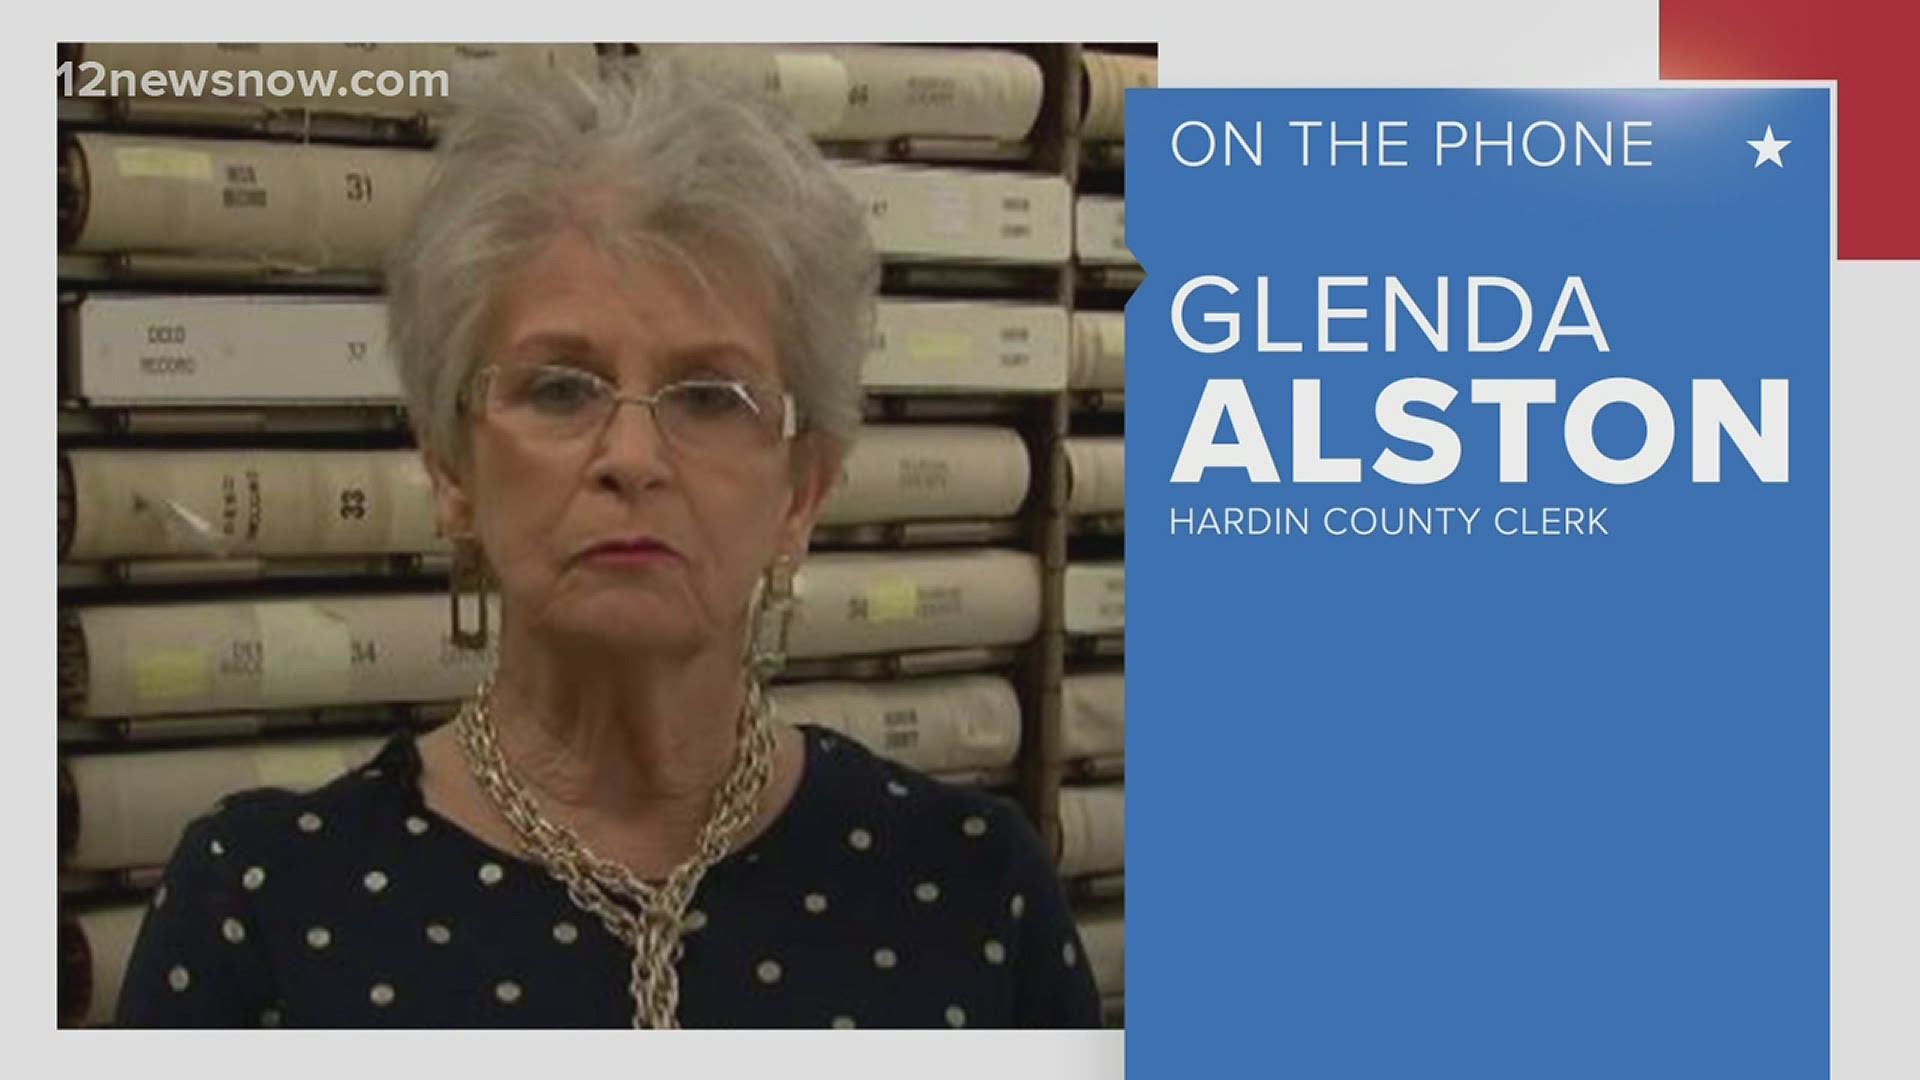 Hardin County Clerk Glenda Alston said measures are being taken to make sure voters stay safe while heading to the polls